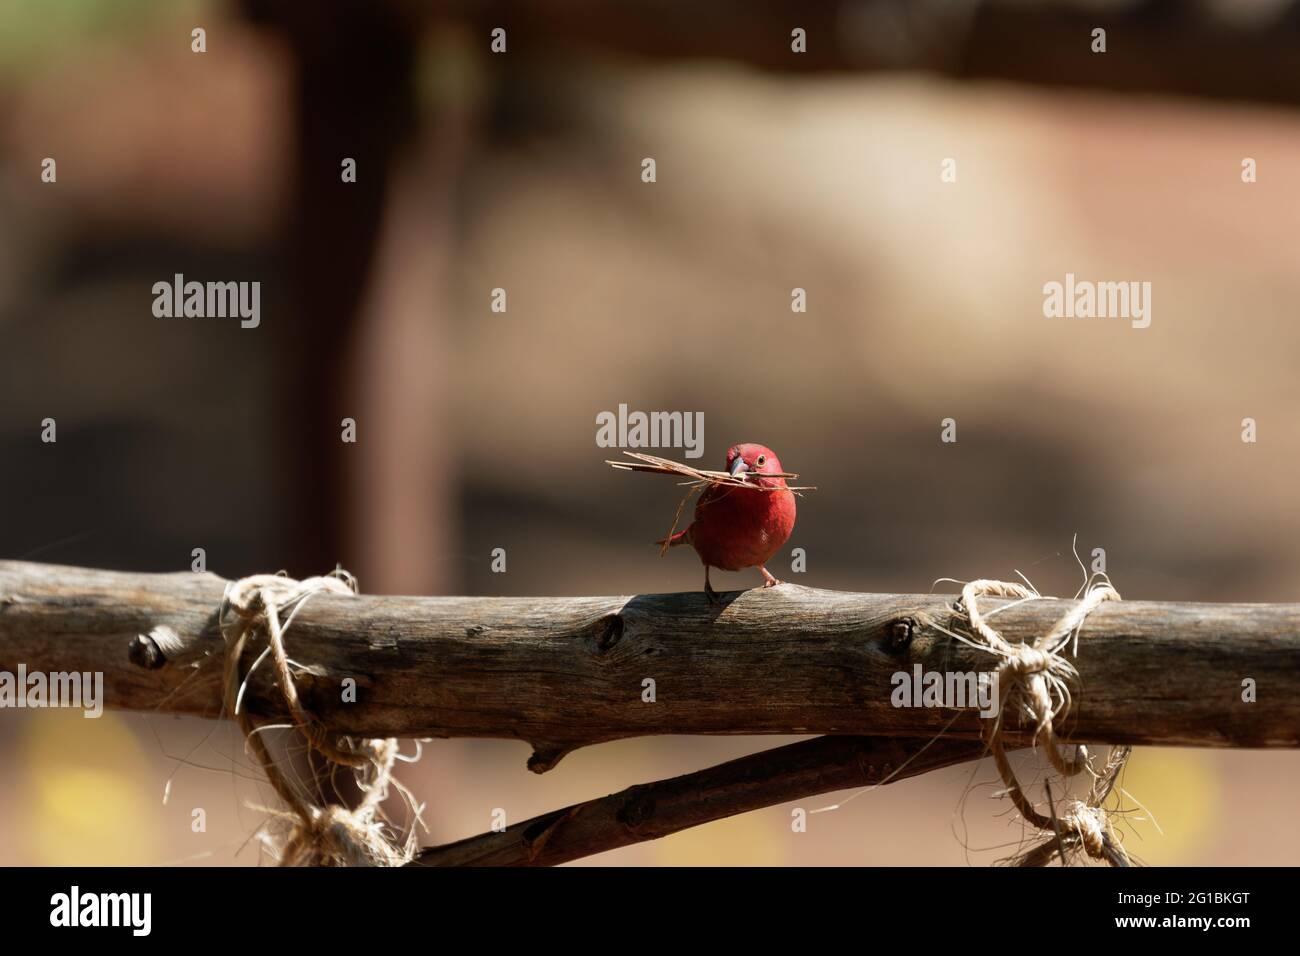 A fiery red Senegalese amaranth sits on a wooden fence with nesting material in its beak Stock Photo